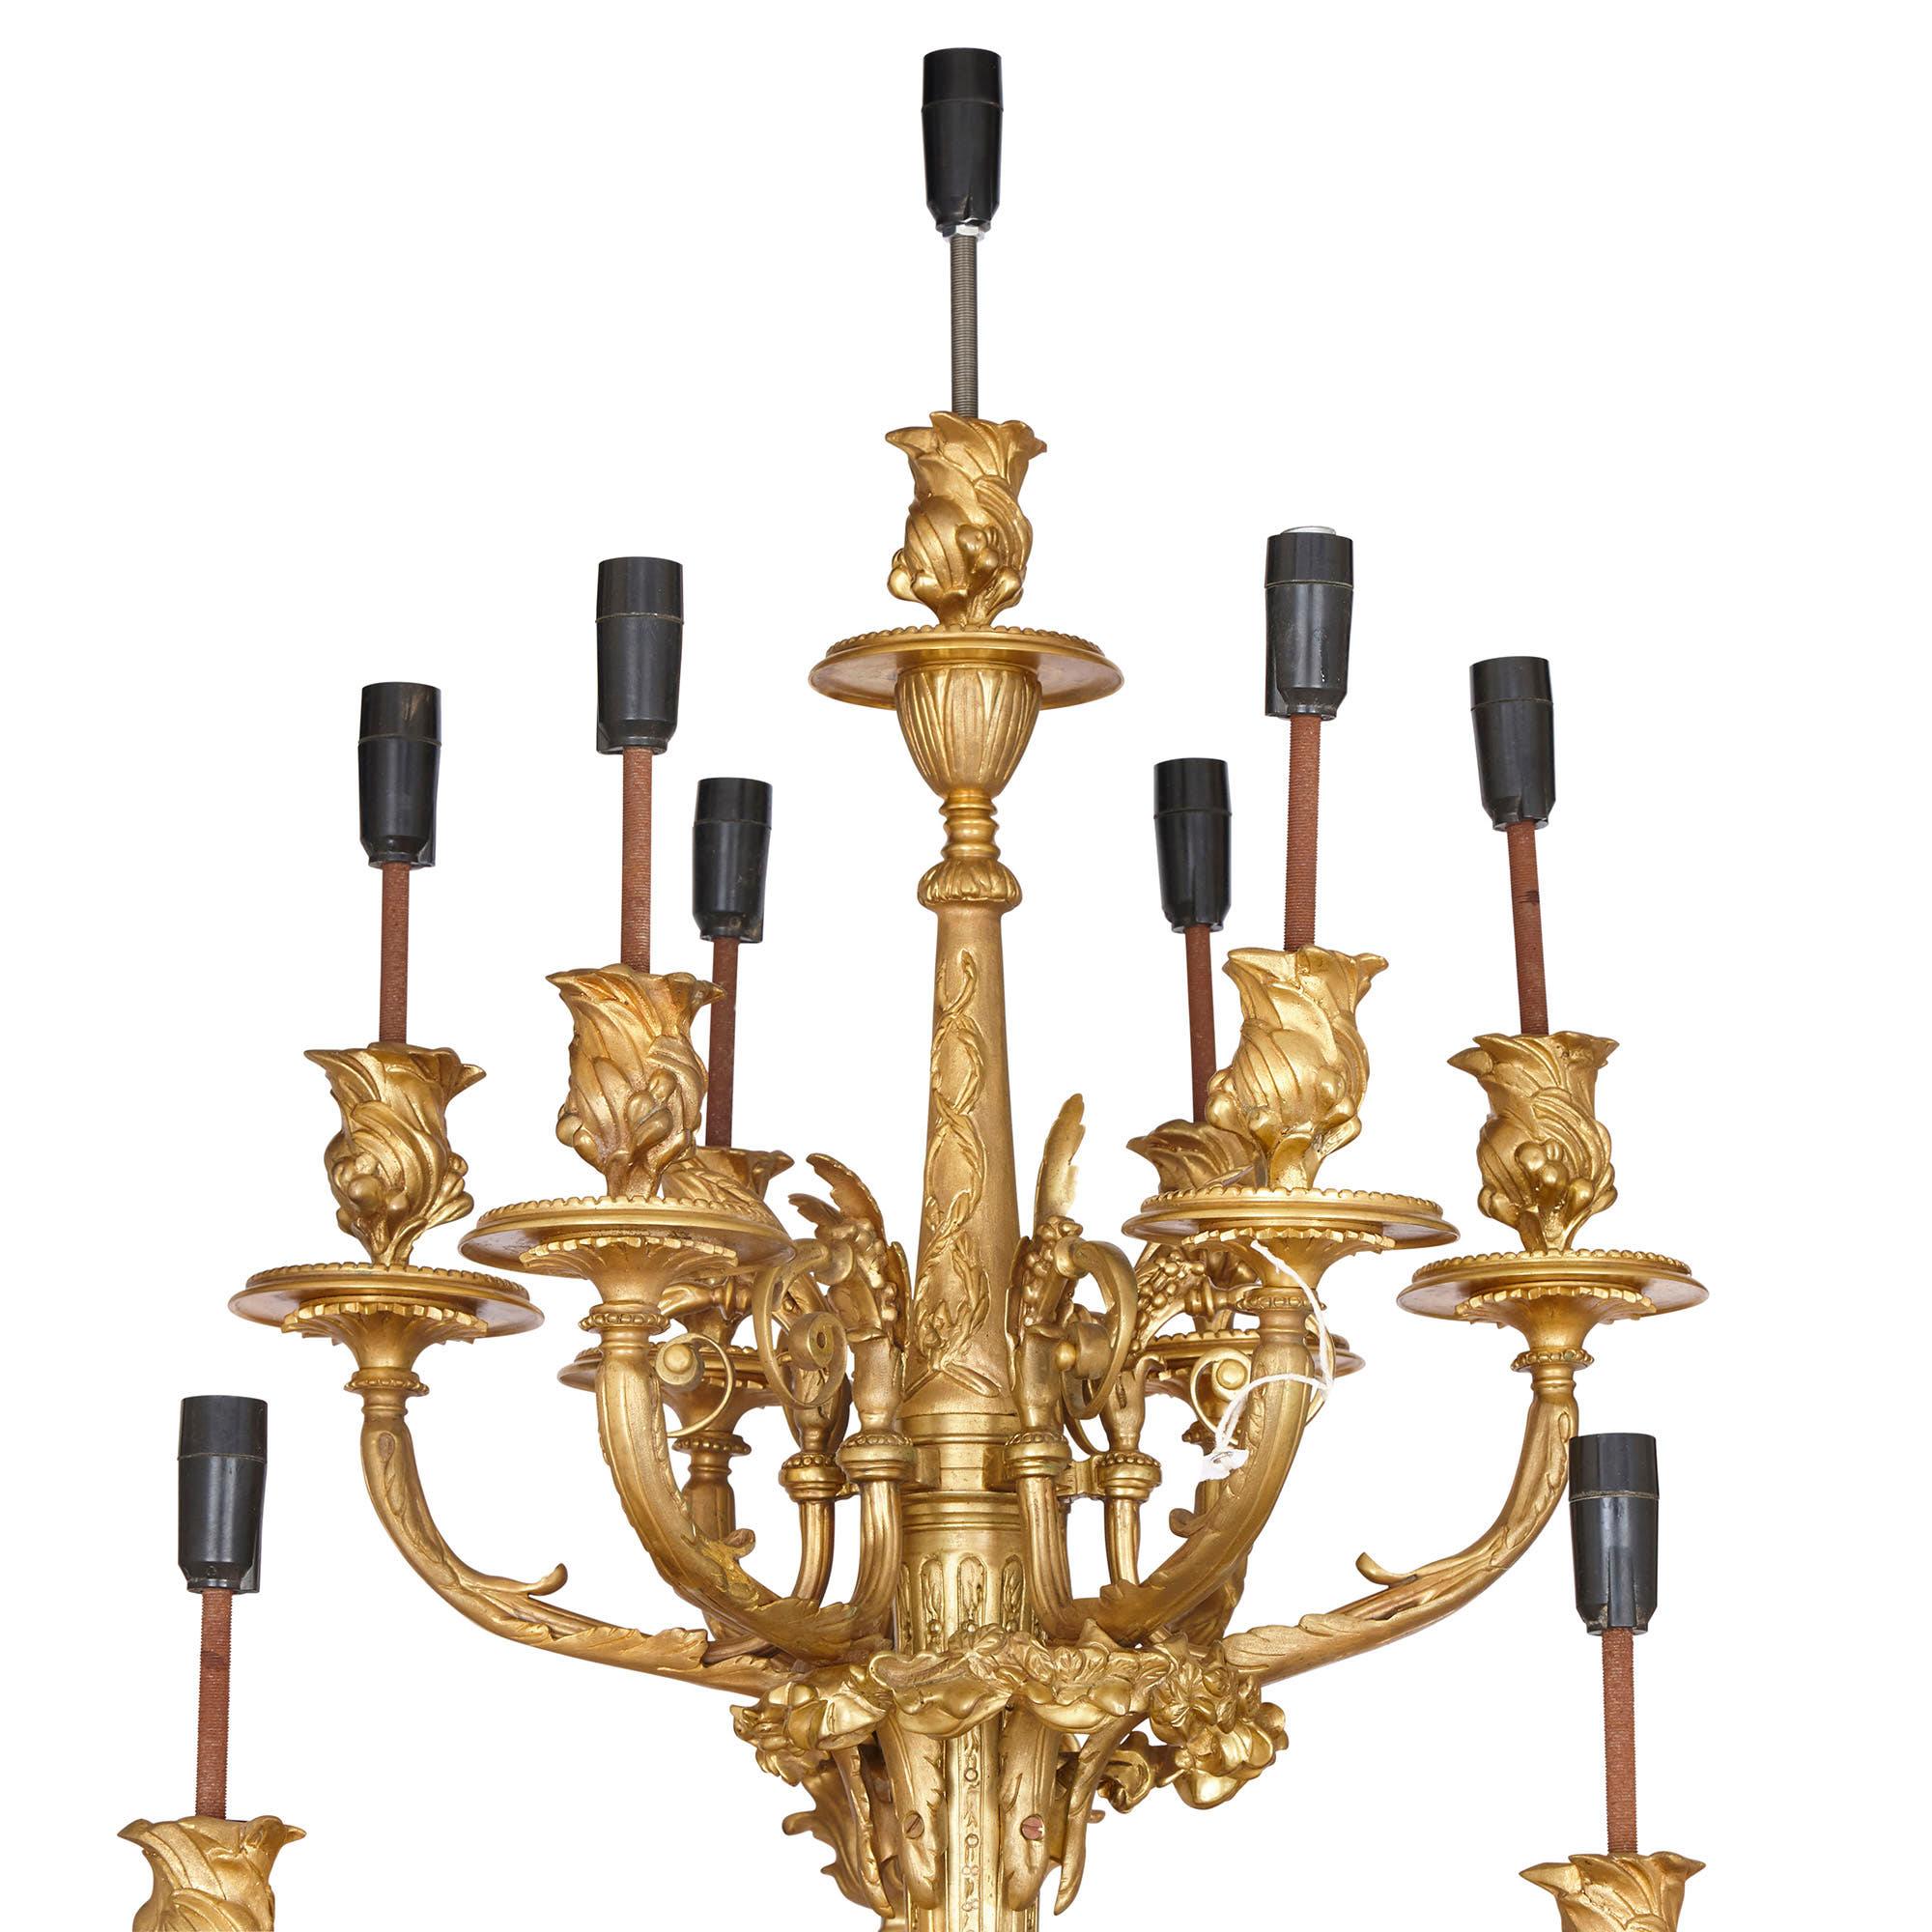 Large French gilt bronze wall sconces
French, 20th century
Measures: Height 165cm, width 83cm, depth 63cm

Each twelve-branch sconce in this pair, both crafted from gilt bronze in the Louis XV style, is unusually large. Each sconce features